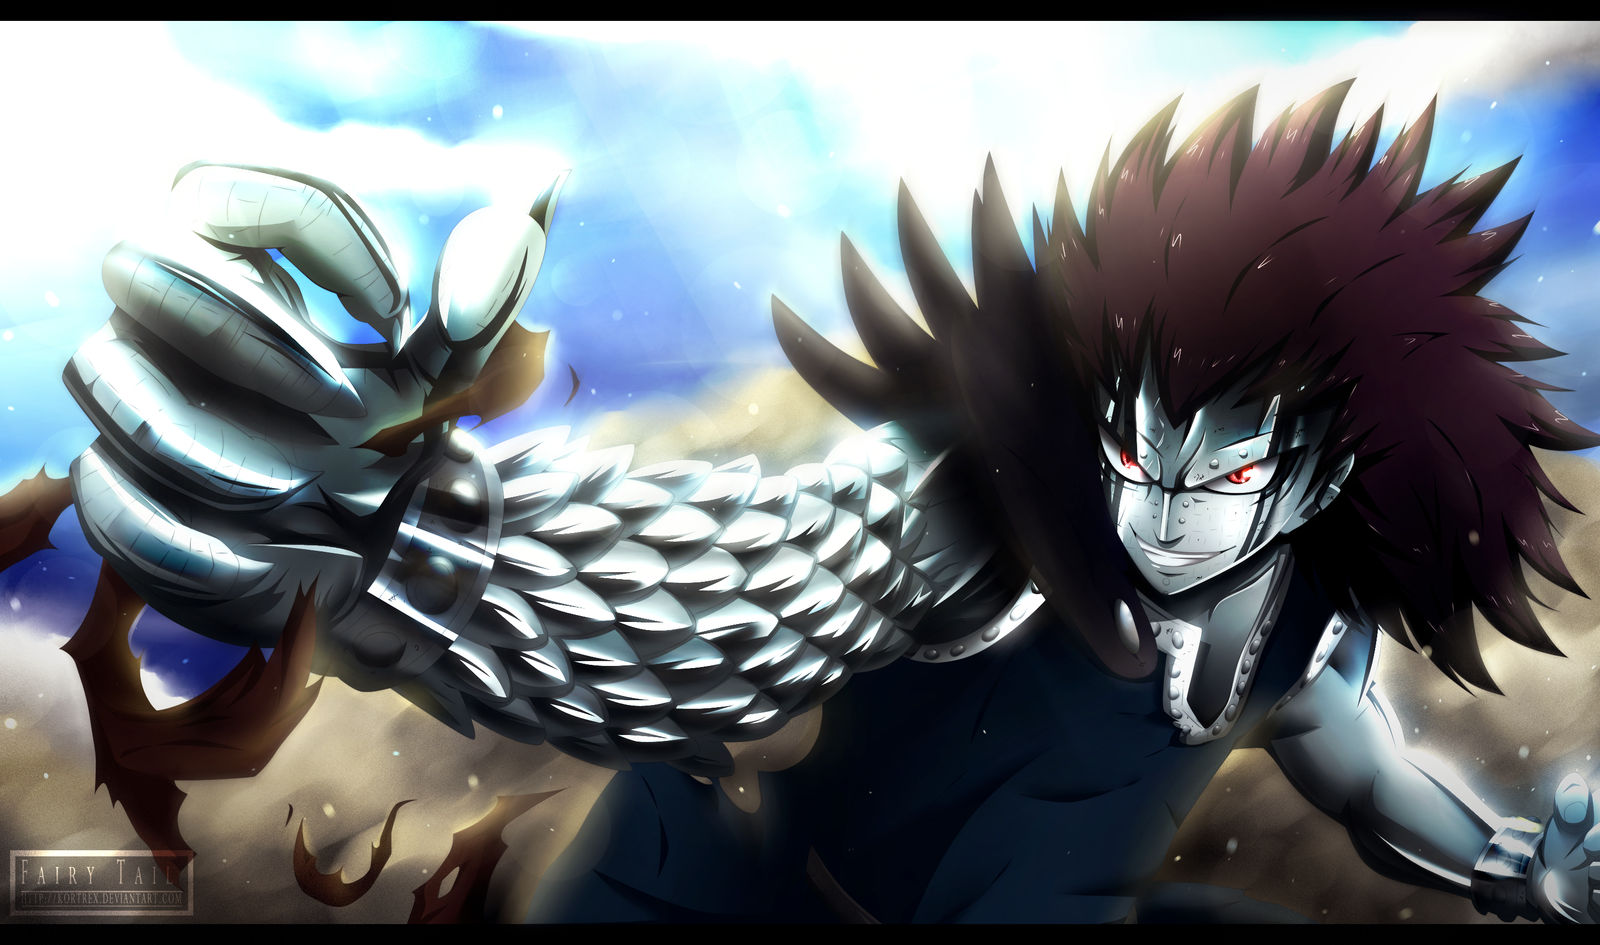 Fairy Tail Chapter 61 Gajeel Redfox Commission By Kortrex On Deviantart